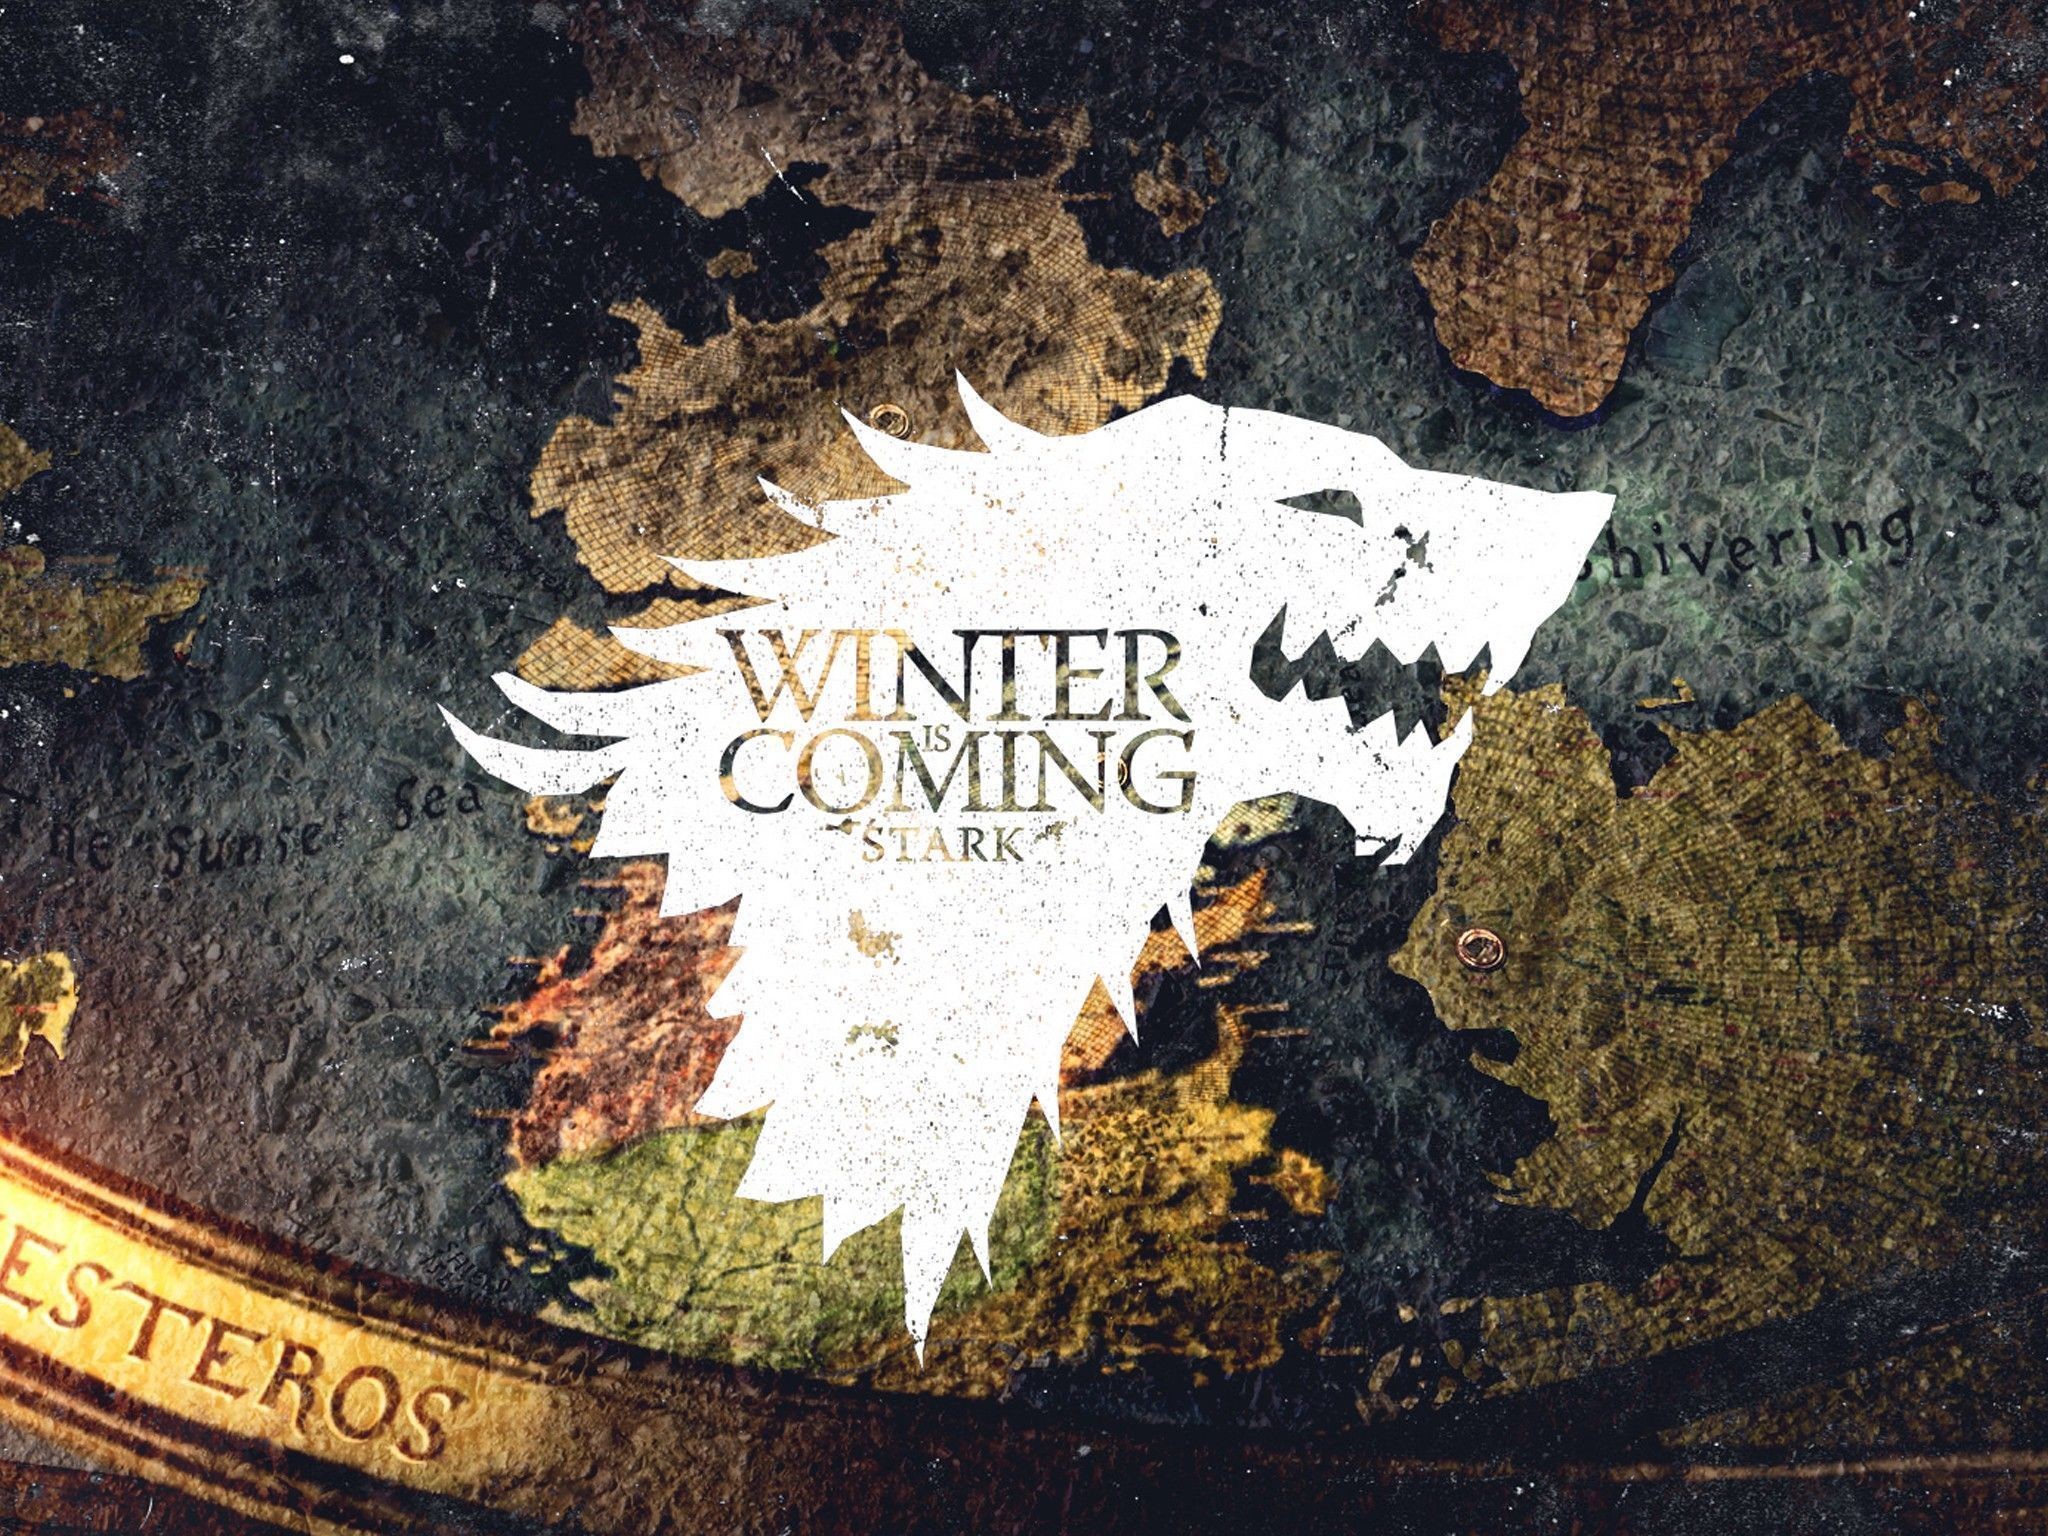 2048x1536 Crest Game of Thrones Winter is Coming direwolf House Stark wolves .